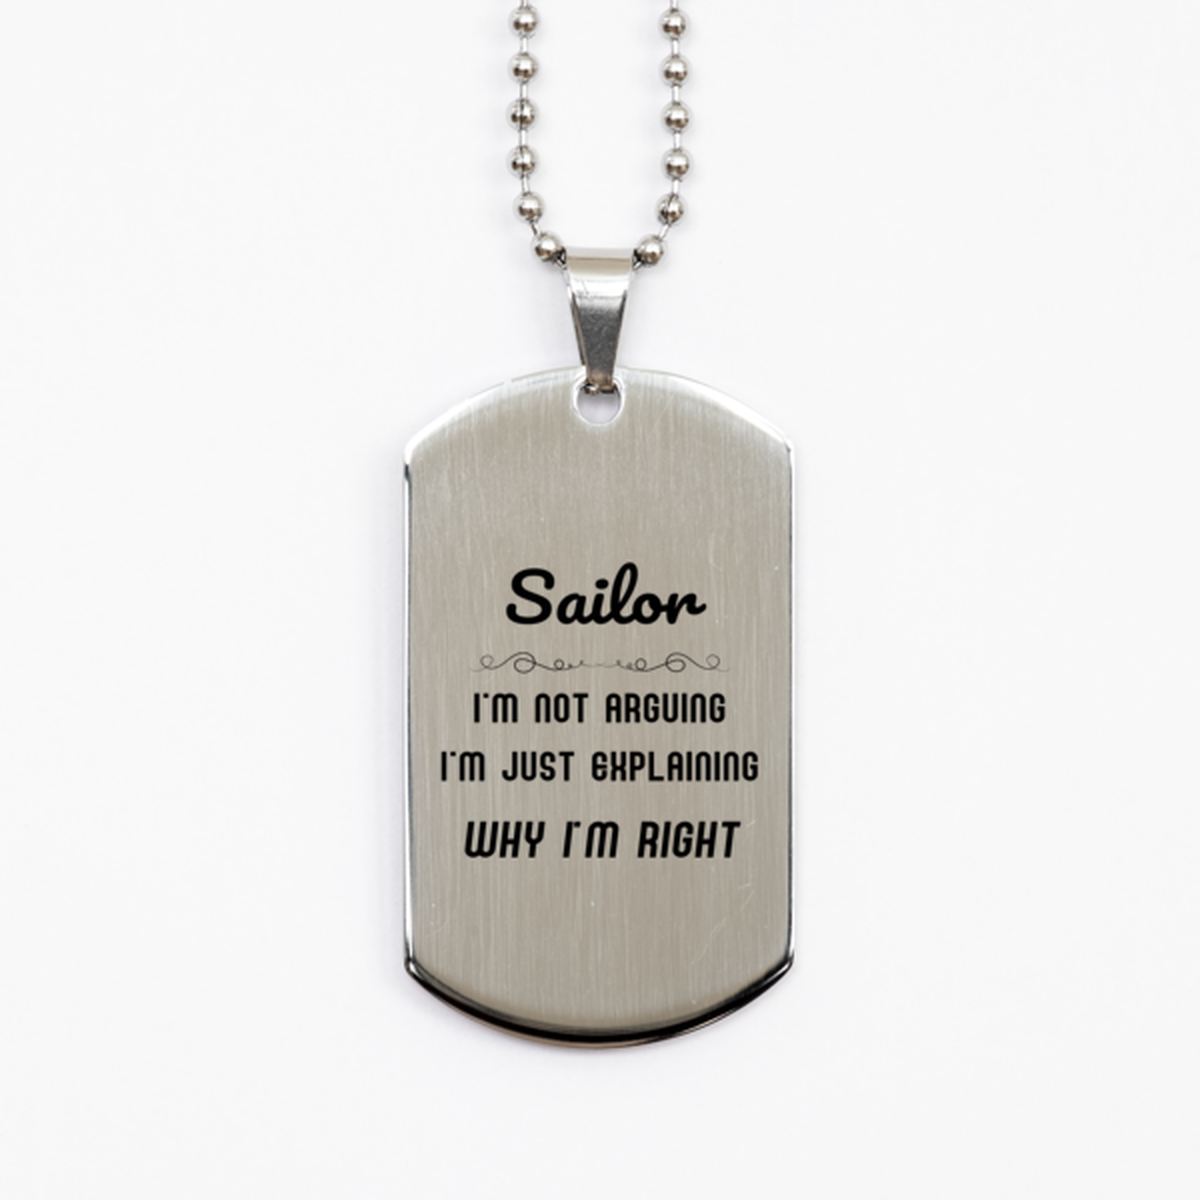 Sailor I'm not Arguing. I'm Just Explaining Why I'm RIGHT Silver Dog Tag, Funny Saying Quote Sailor Gifts For Sailor Graduation Birthday Christmas Gifts for Men Women Coworker